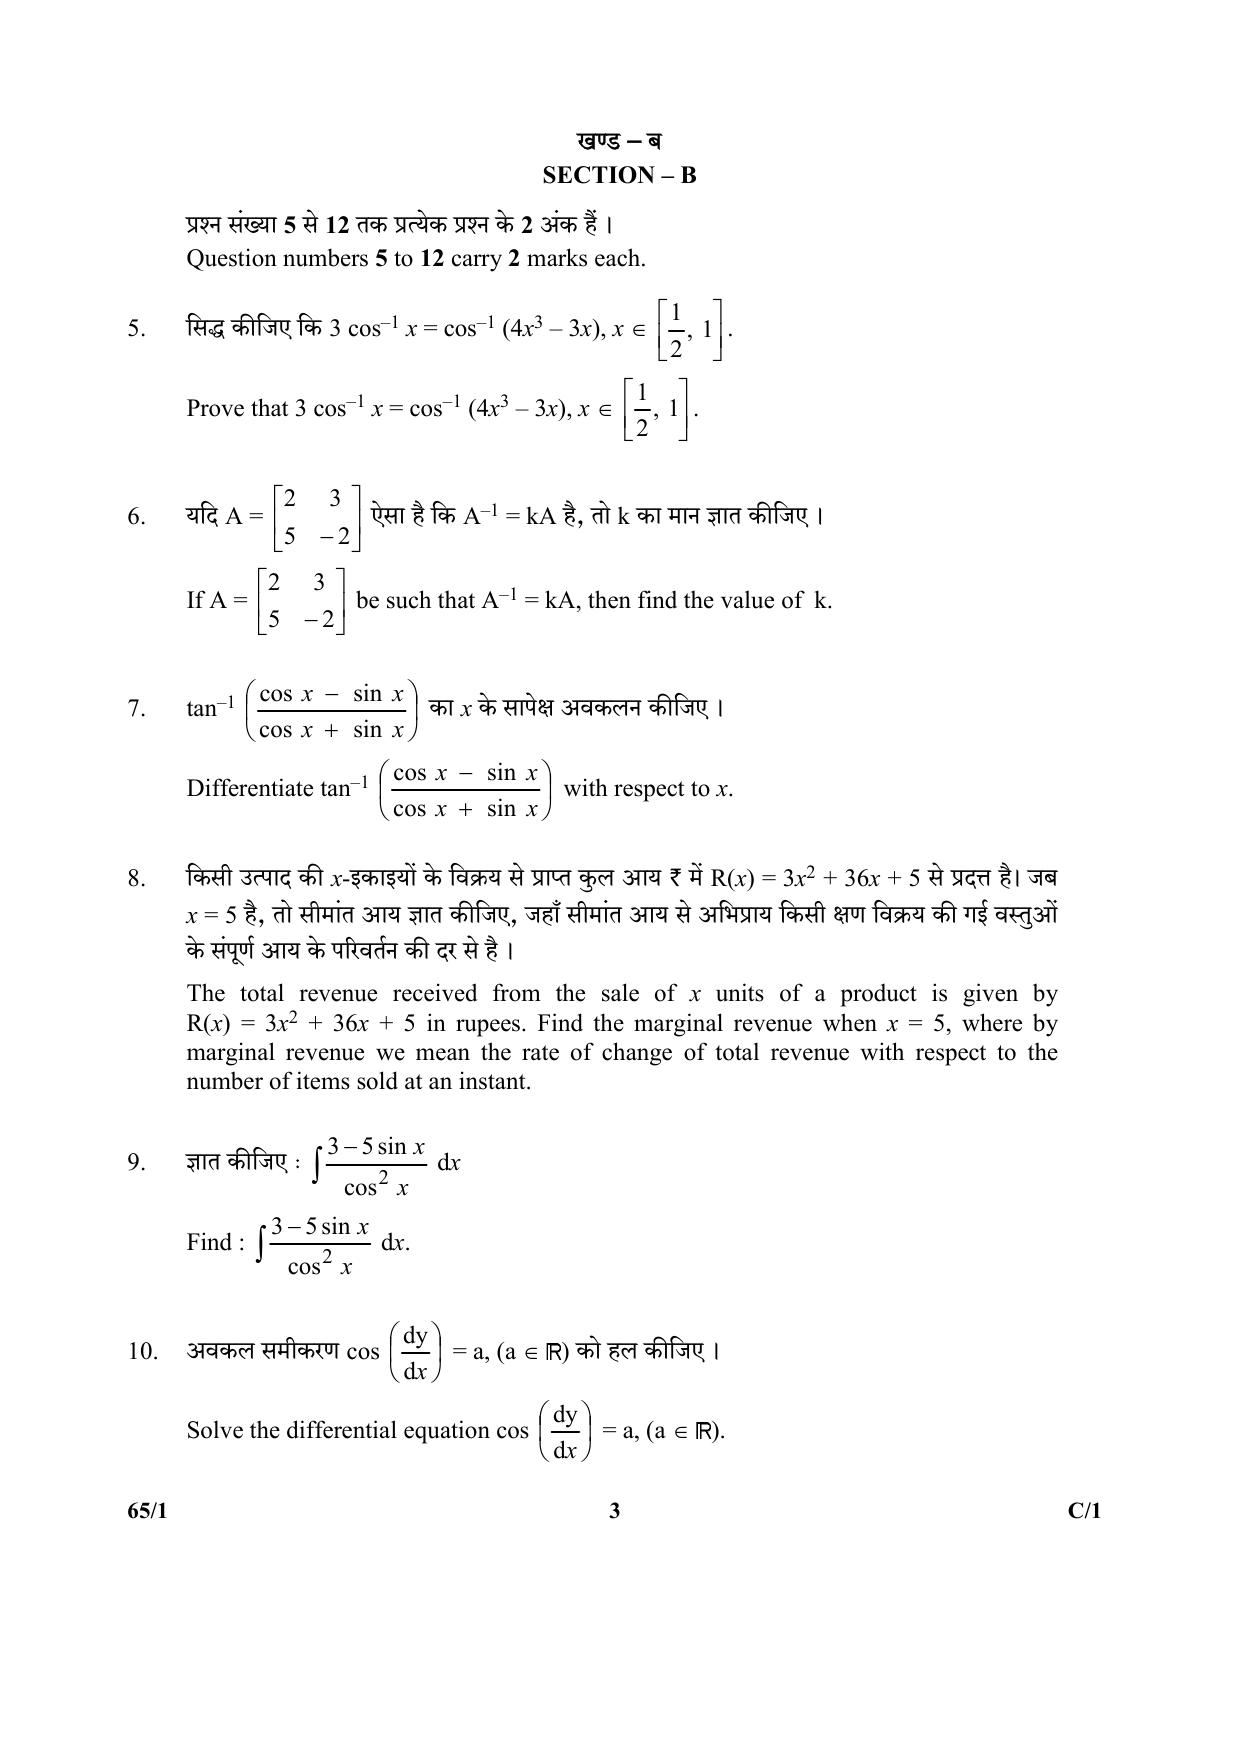 CBSE Class 12 65-1 (Mathematics) 2018 Compartment Question Paper - Page 3